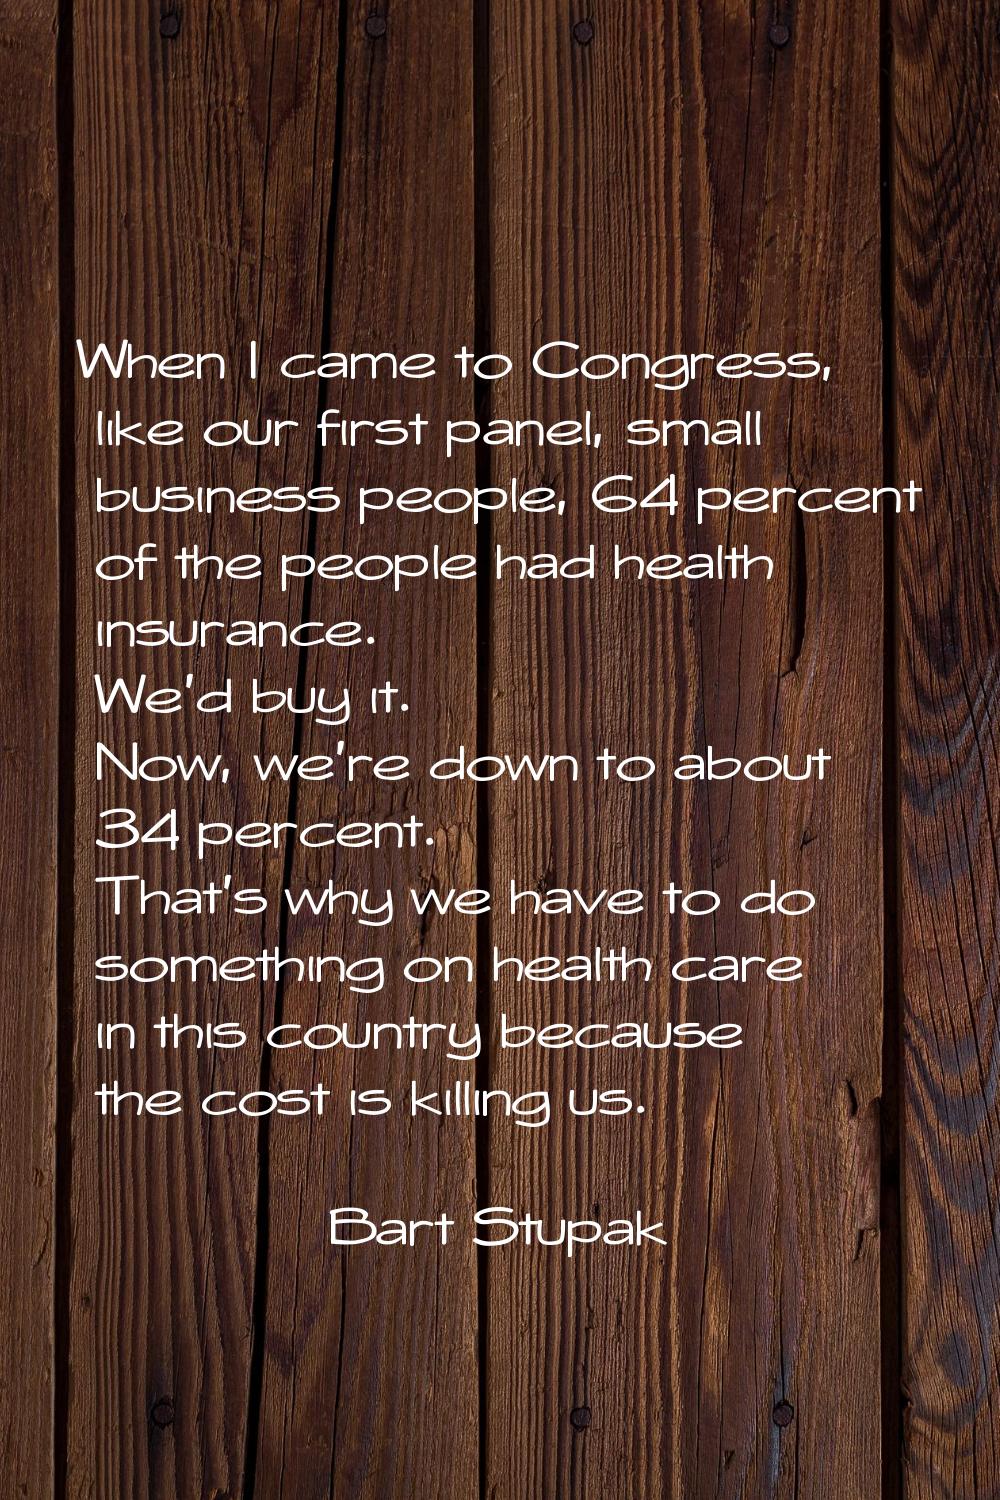 When I came to Congress, like our first panel, small business people, 64 percent of the people had 